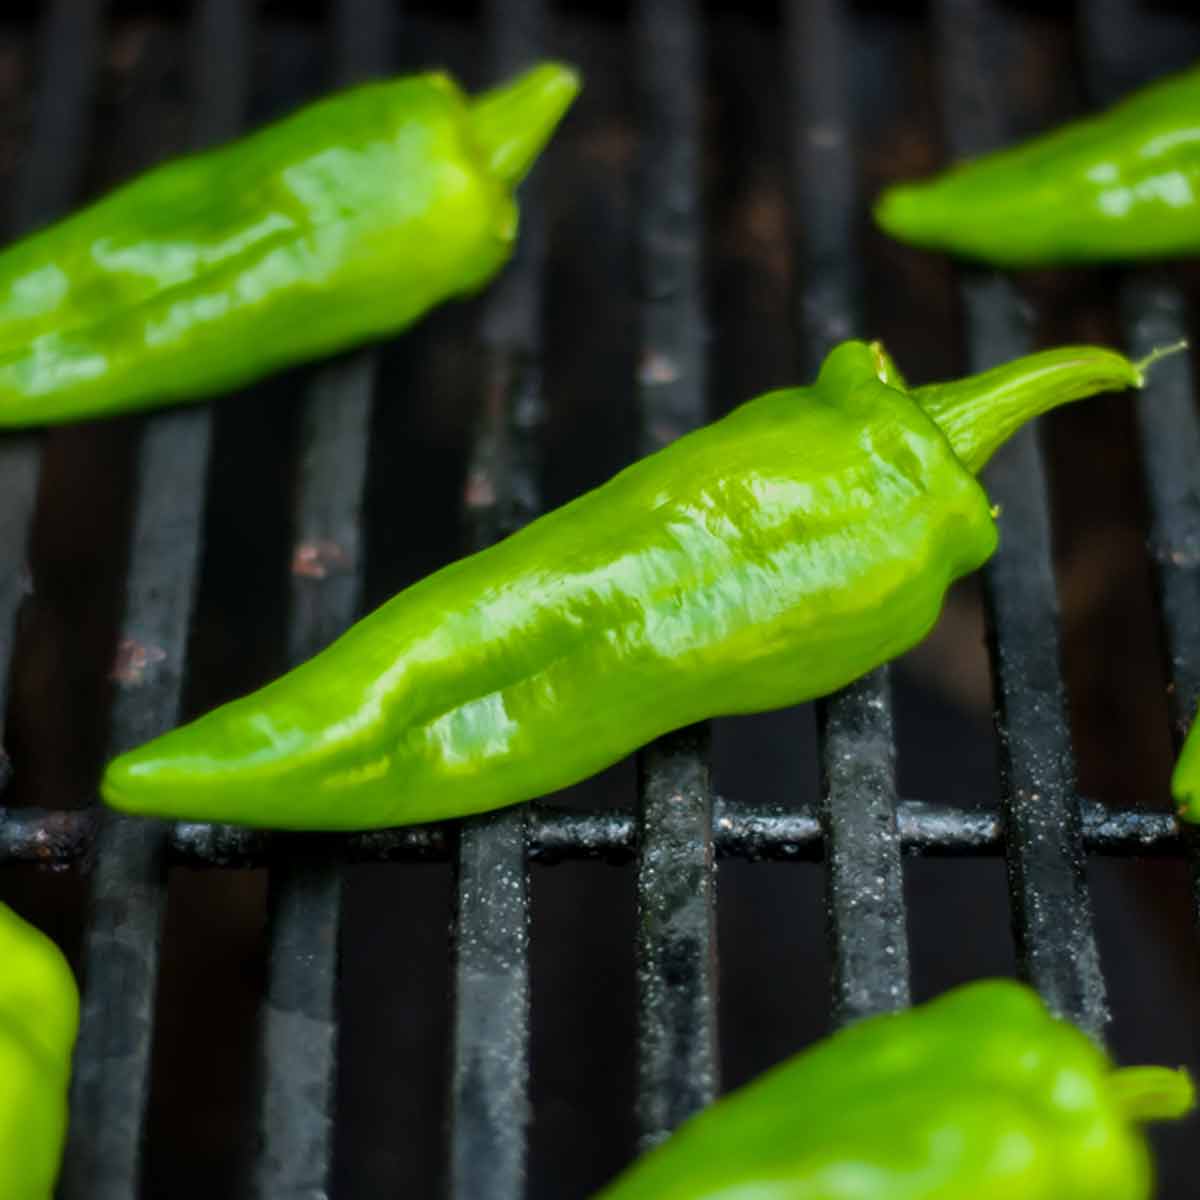 Five green chiles on a hot grill grate.